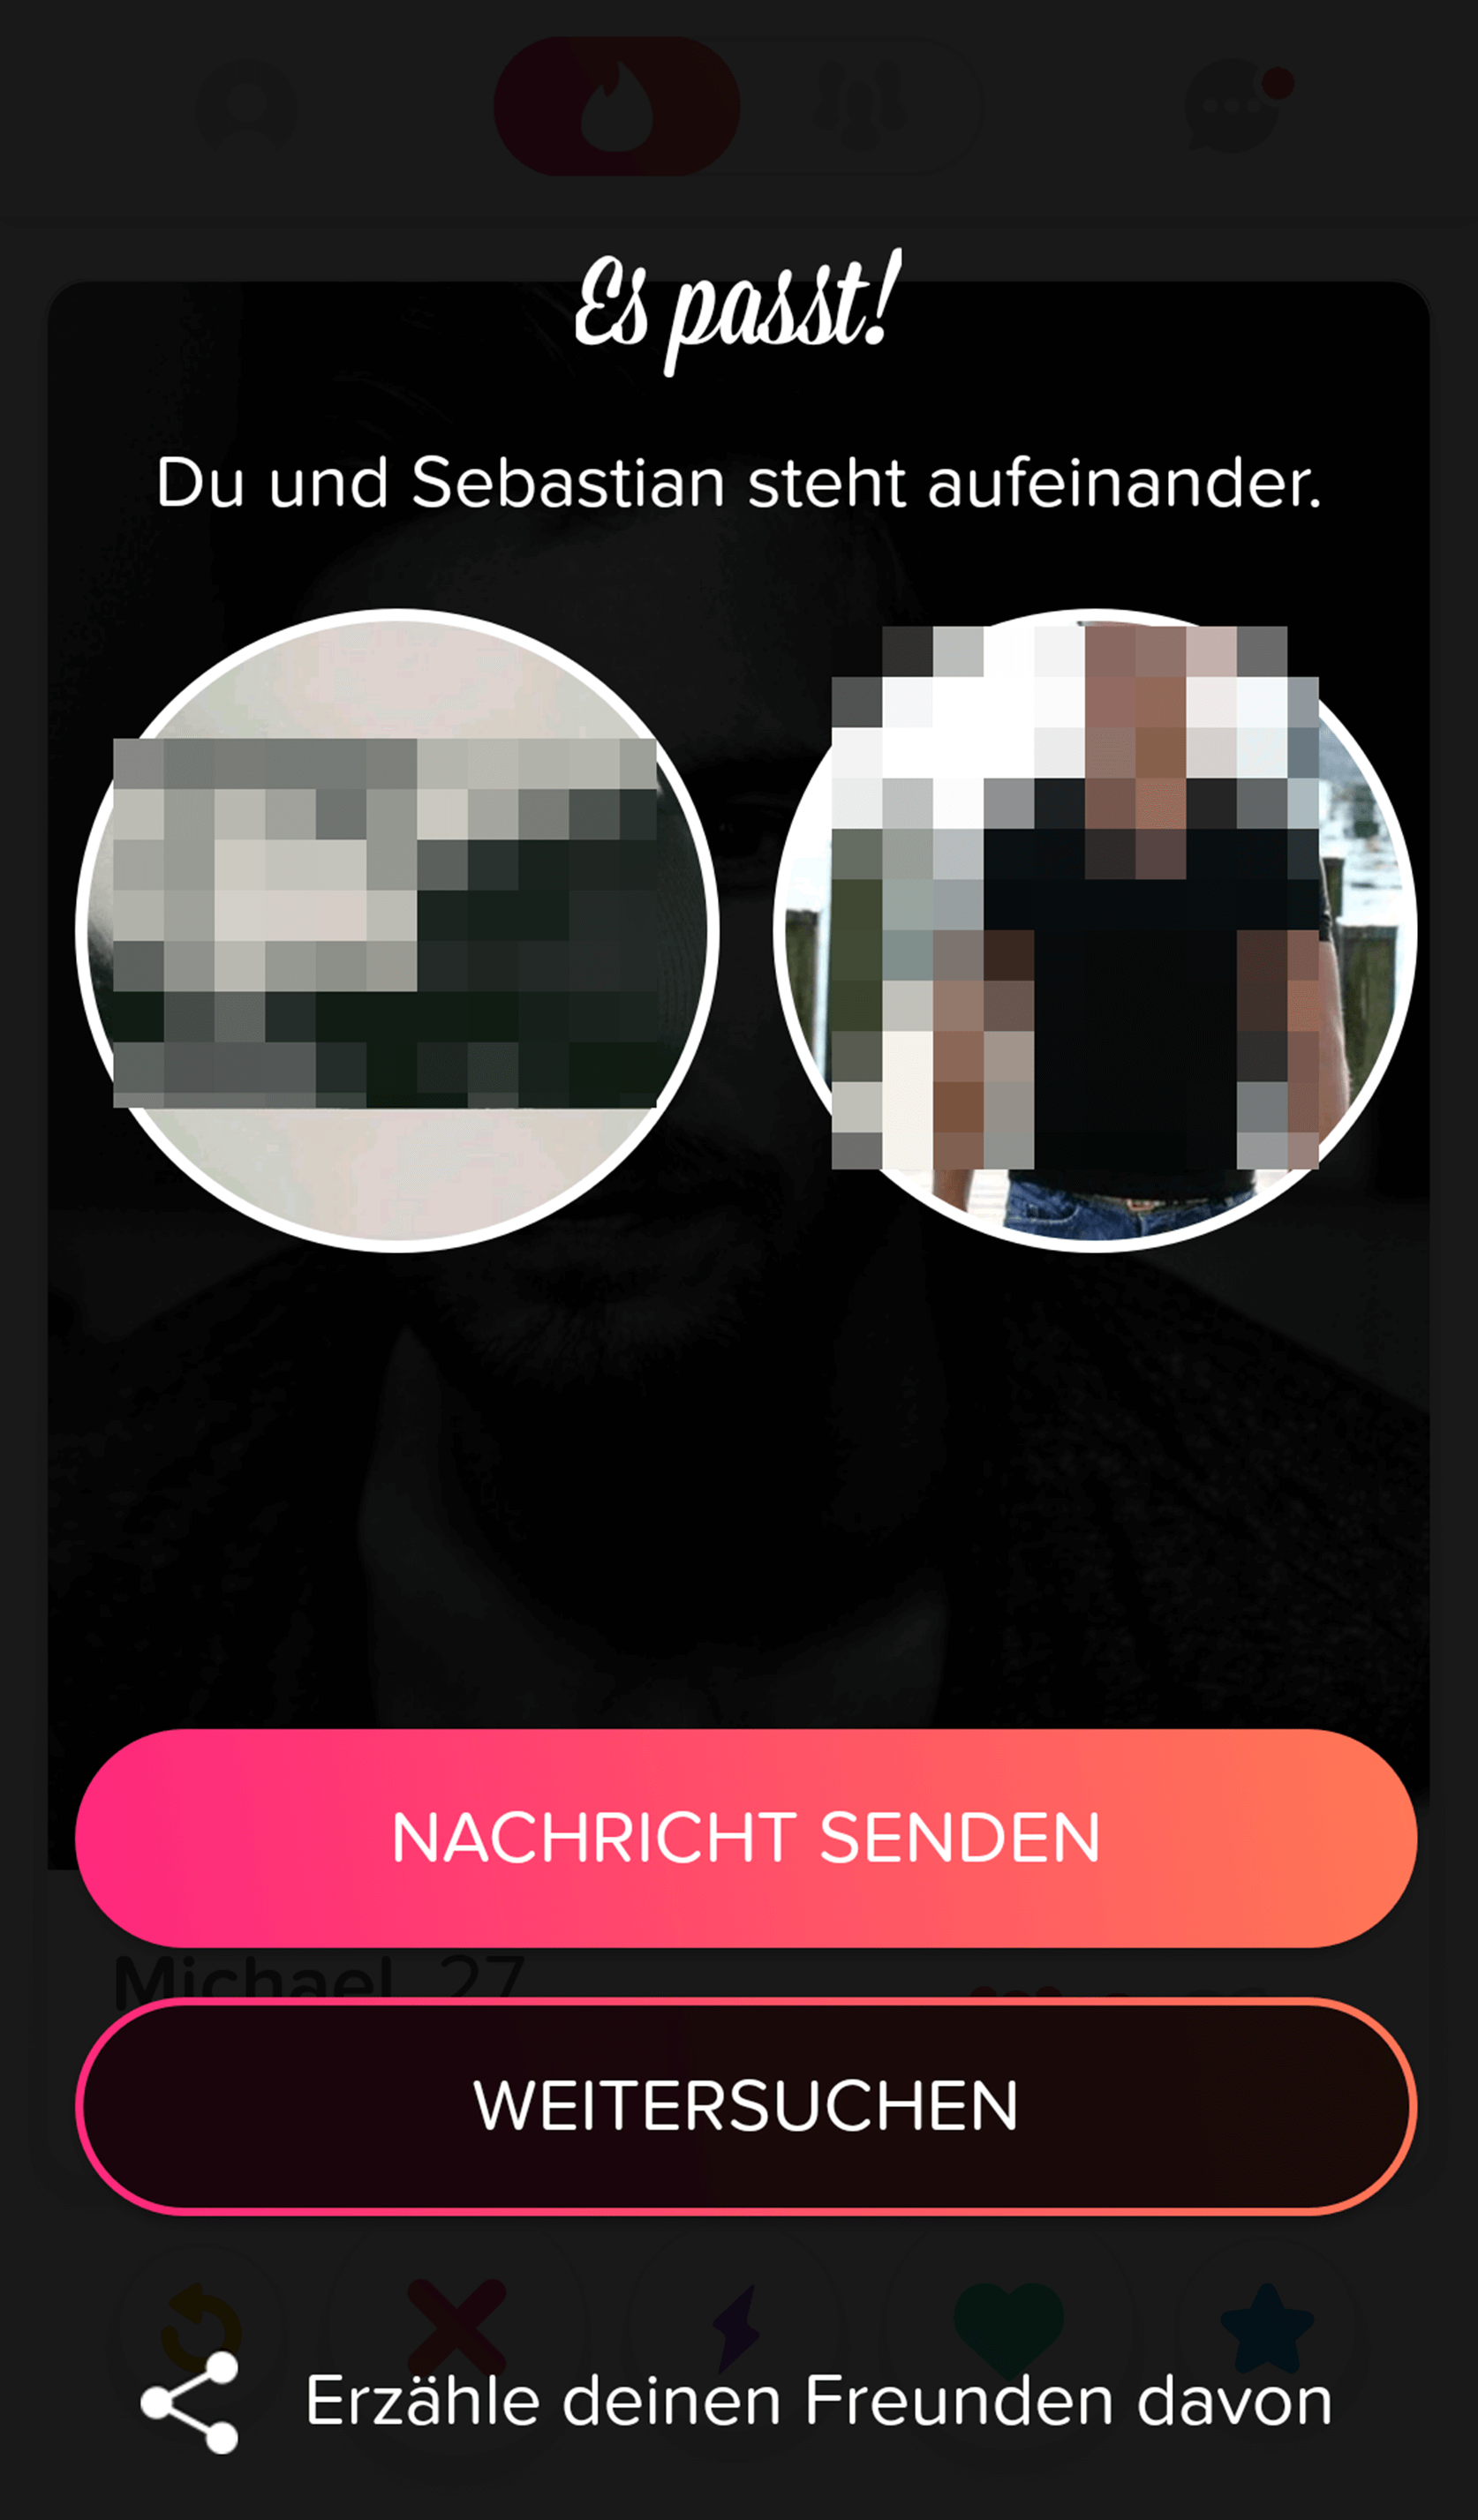 Sehen tinder kostenlos likes Group chat